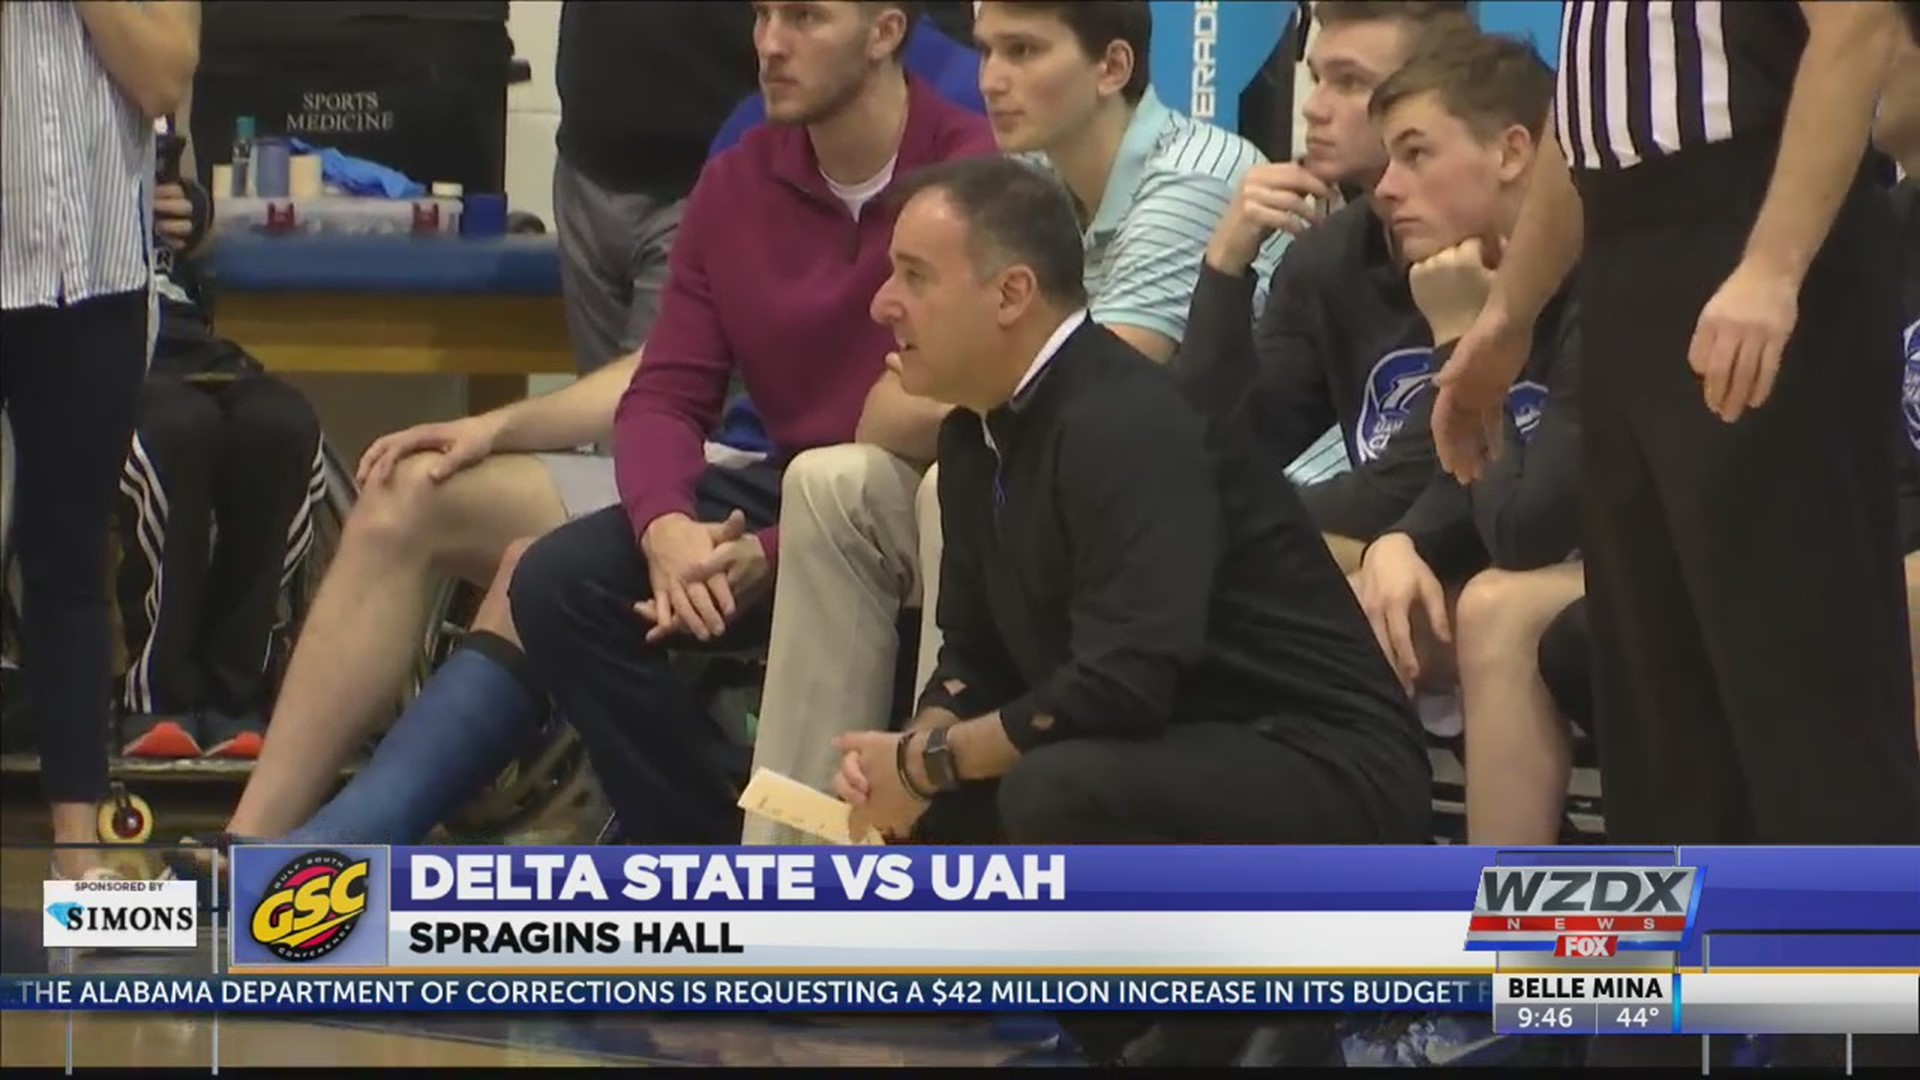 The UAH men and women's basketball teams picked up some important mid season victories against Delta State Thursday at Spragins Hall.